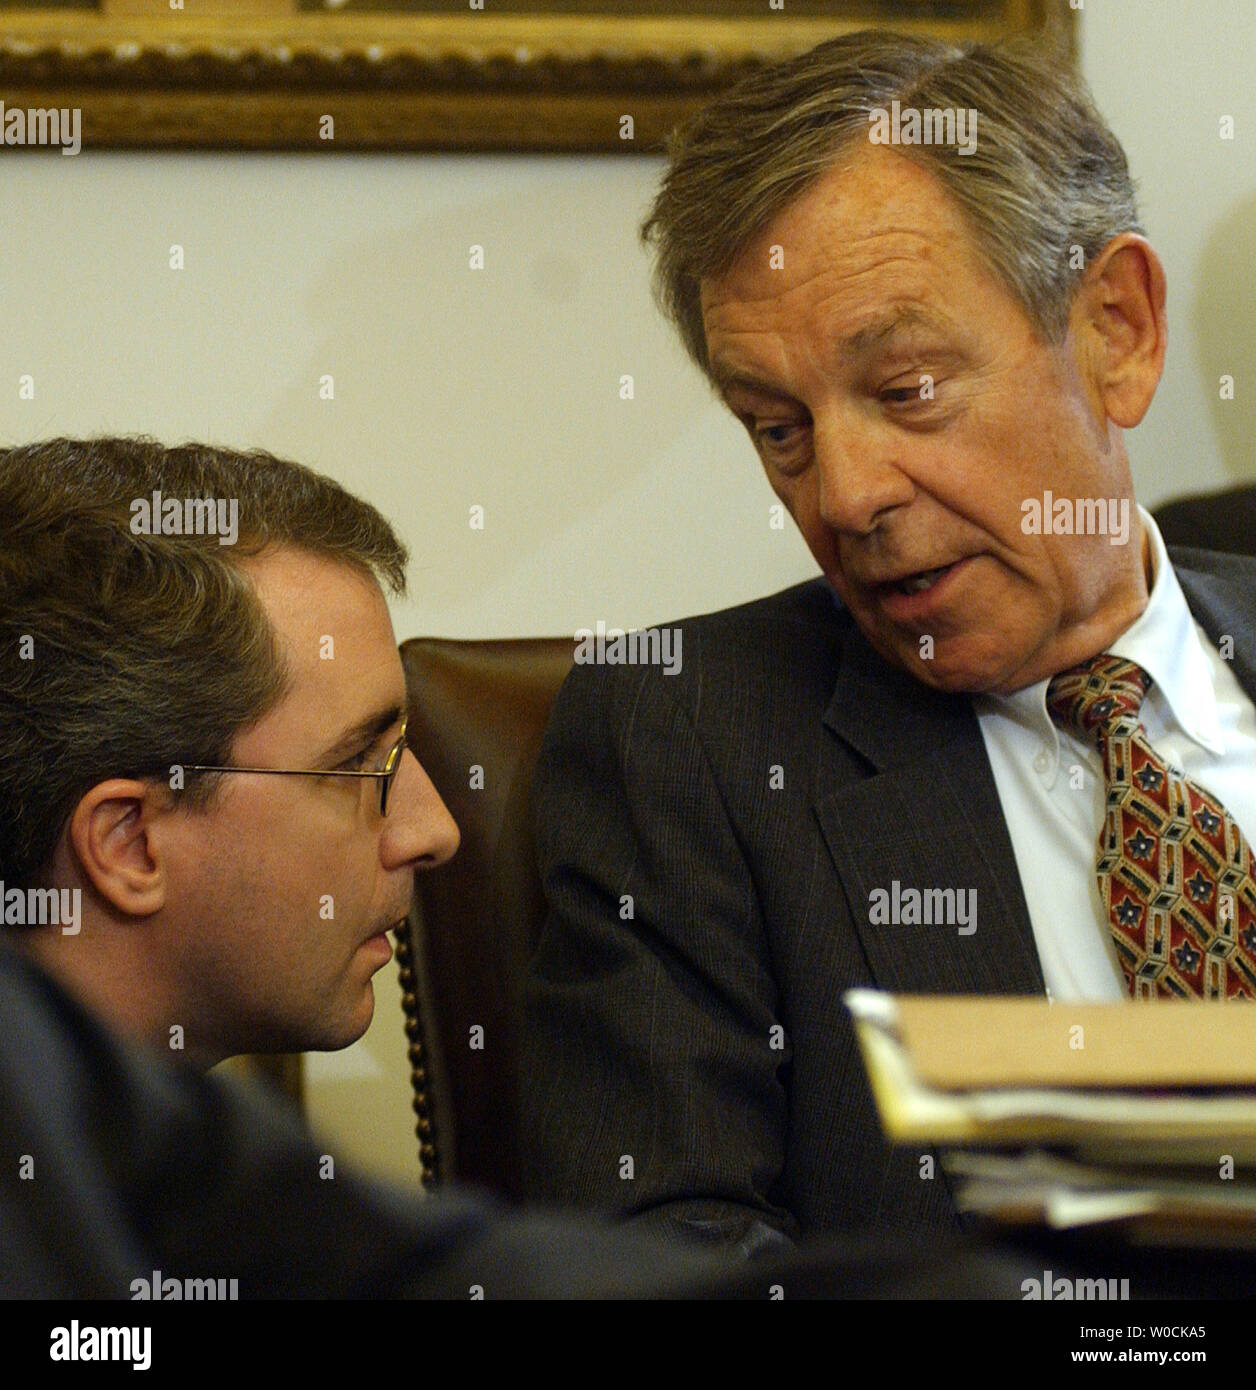 Sen. George Voinovich, R-Ohio, speaks to an aid during the Senate Foreign Relations Committee meeting which was held to vote on John Bolton to be U.S. Ambassador to the United Nations on Capitol Hill in Washington on April 19, 2005. The committee chose to delay the vote after Sens. Chuck Hagel, R-Neb. and George Voinovich, R-Ohio, expressed concern allegations against him.   (UPI Photo/Roger L. Wollenberg) Stock Photo